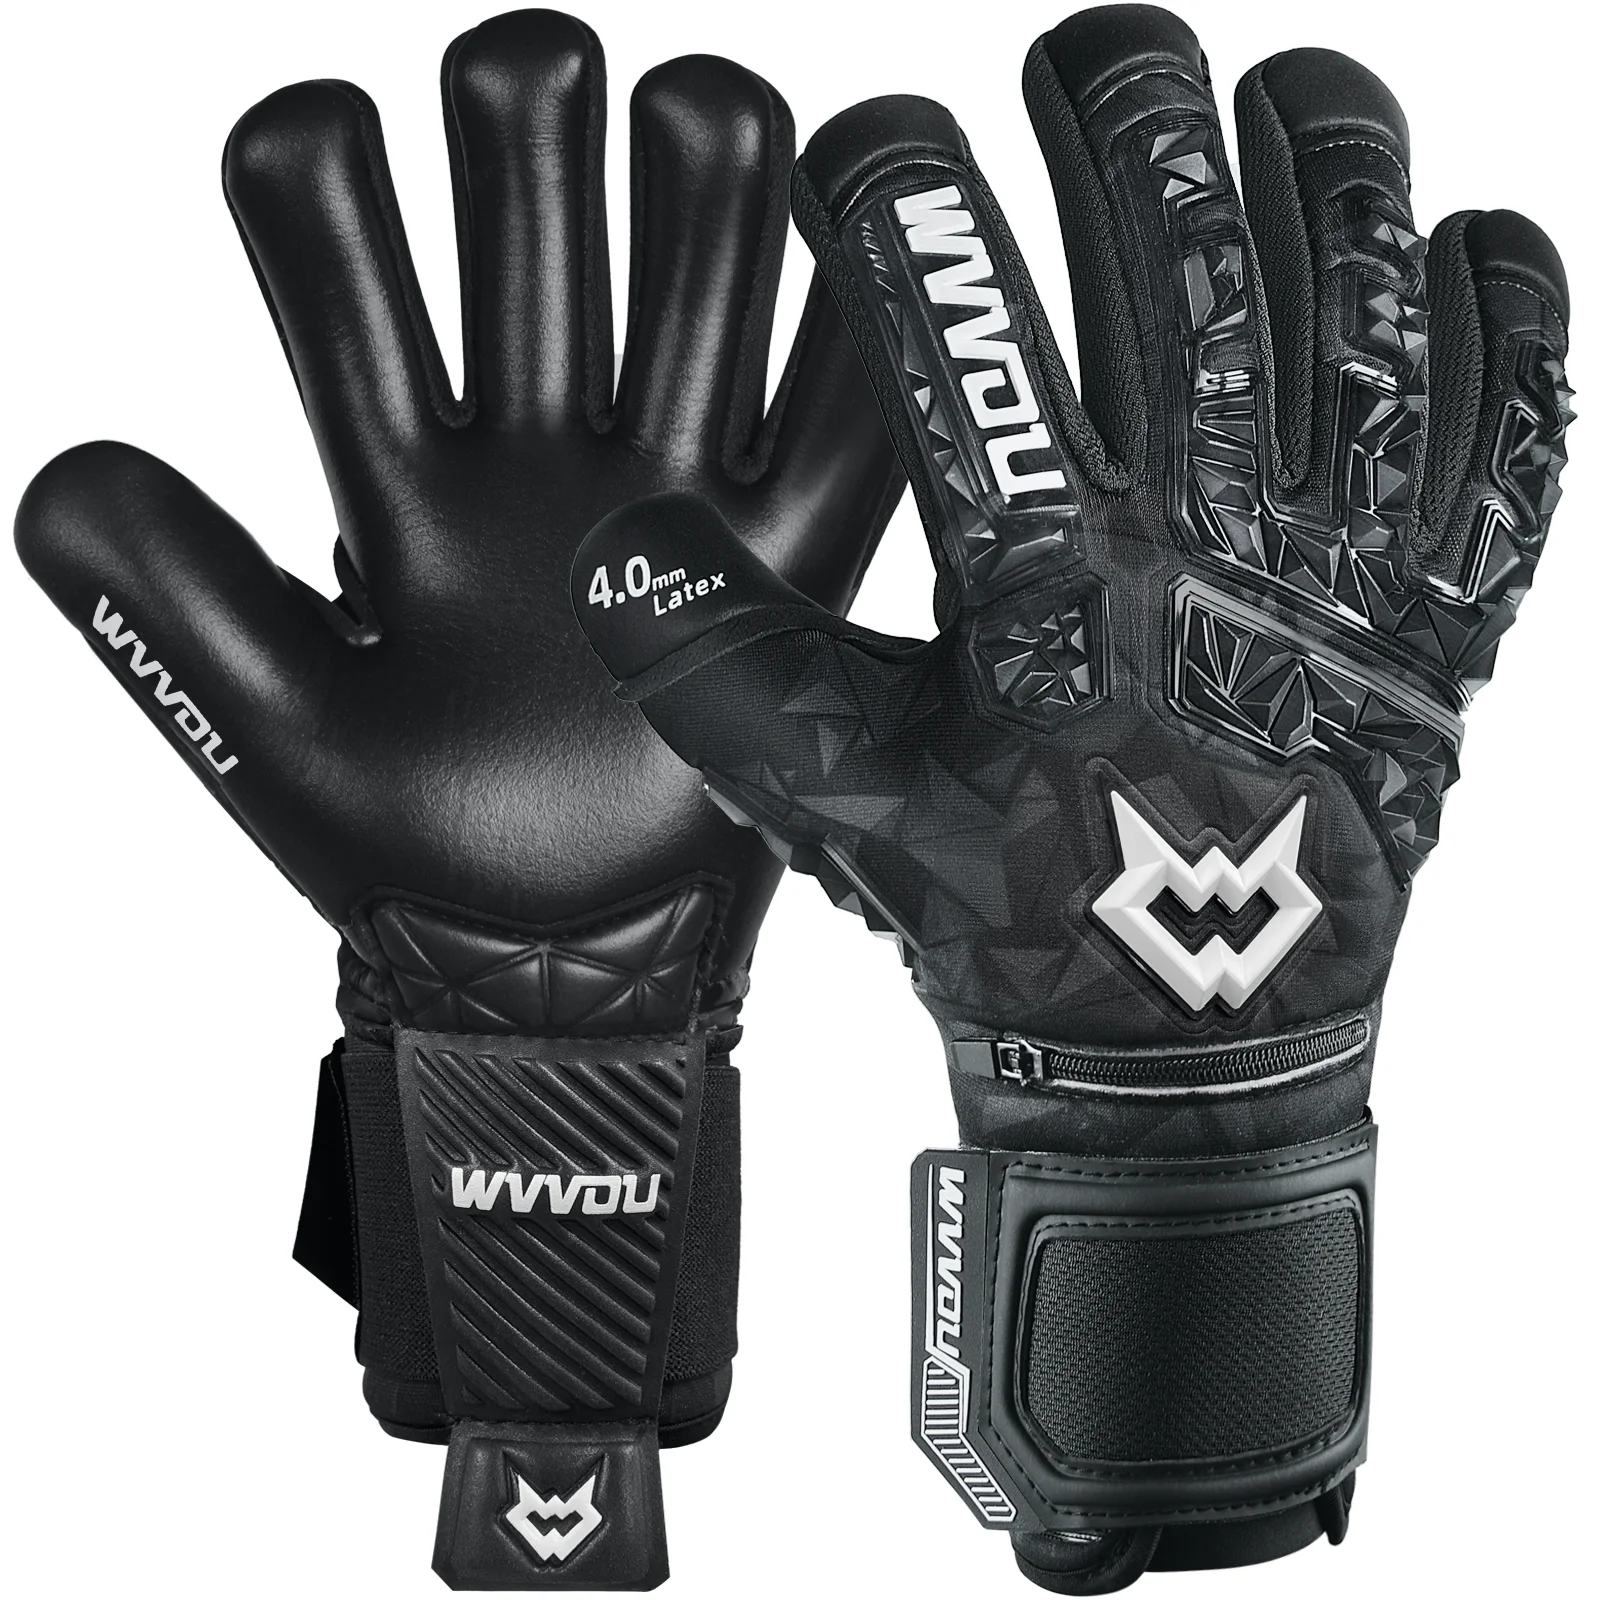 WVVOU Soccer Goalie Gloves for Adults and Youth, High Performance Goalkeeper Gloves with 5 Detachable Finger Saves